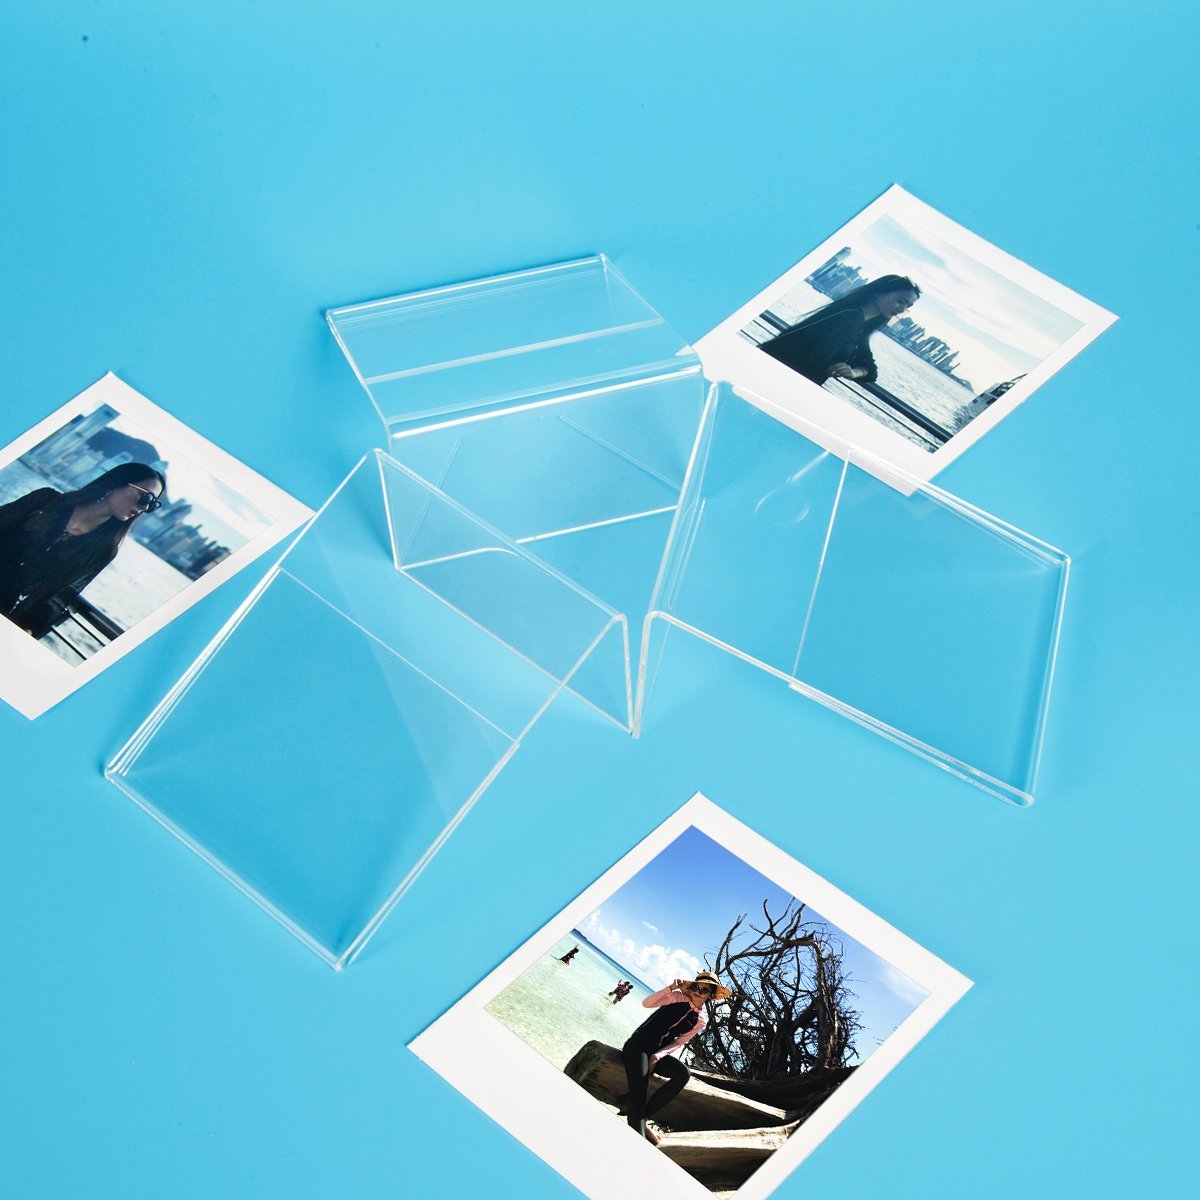 CAIUL L Model Clear Acrylic Photo Frame for Fujifilm Instax Square SQ10 Instant Film, 3pcs